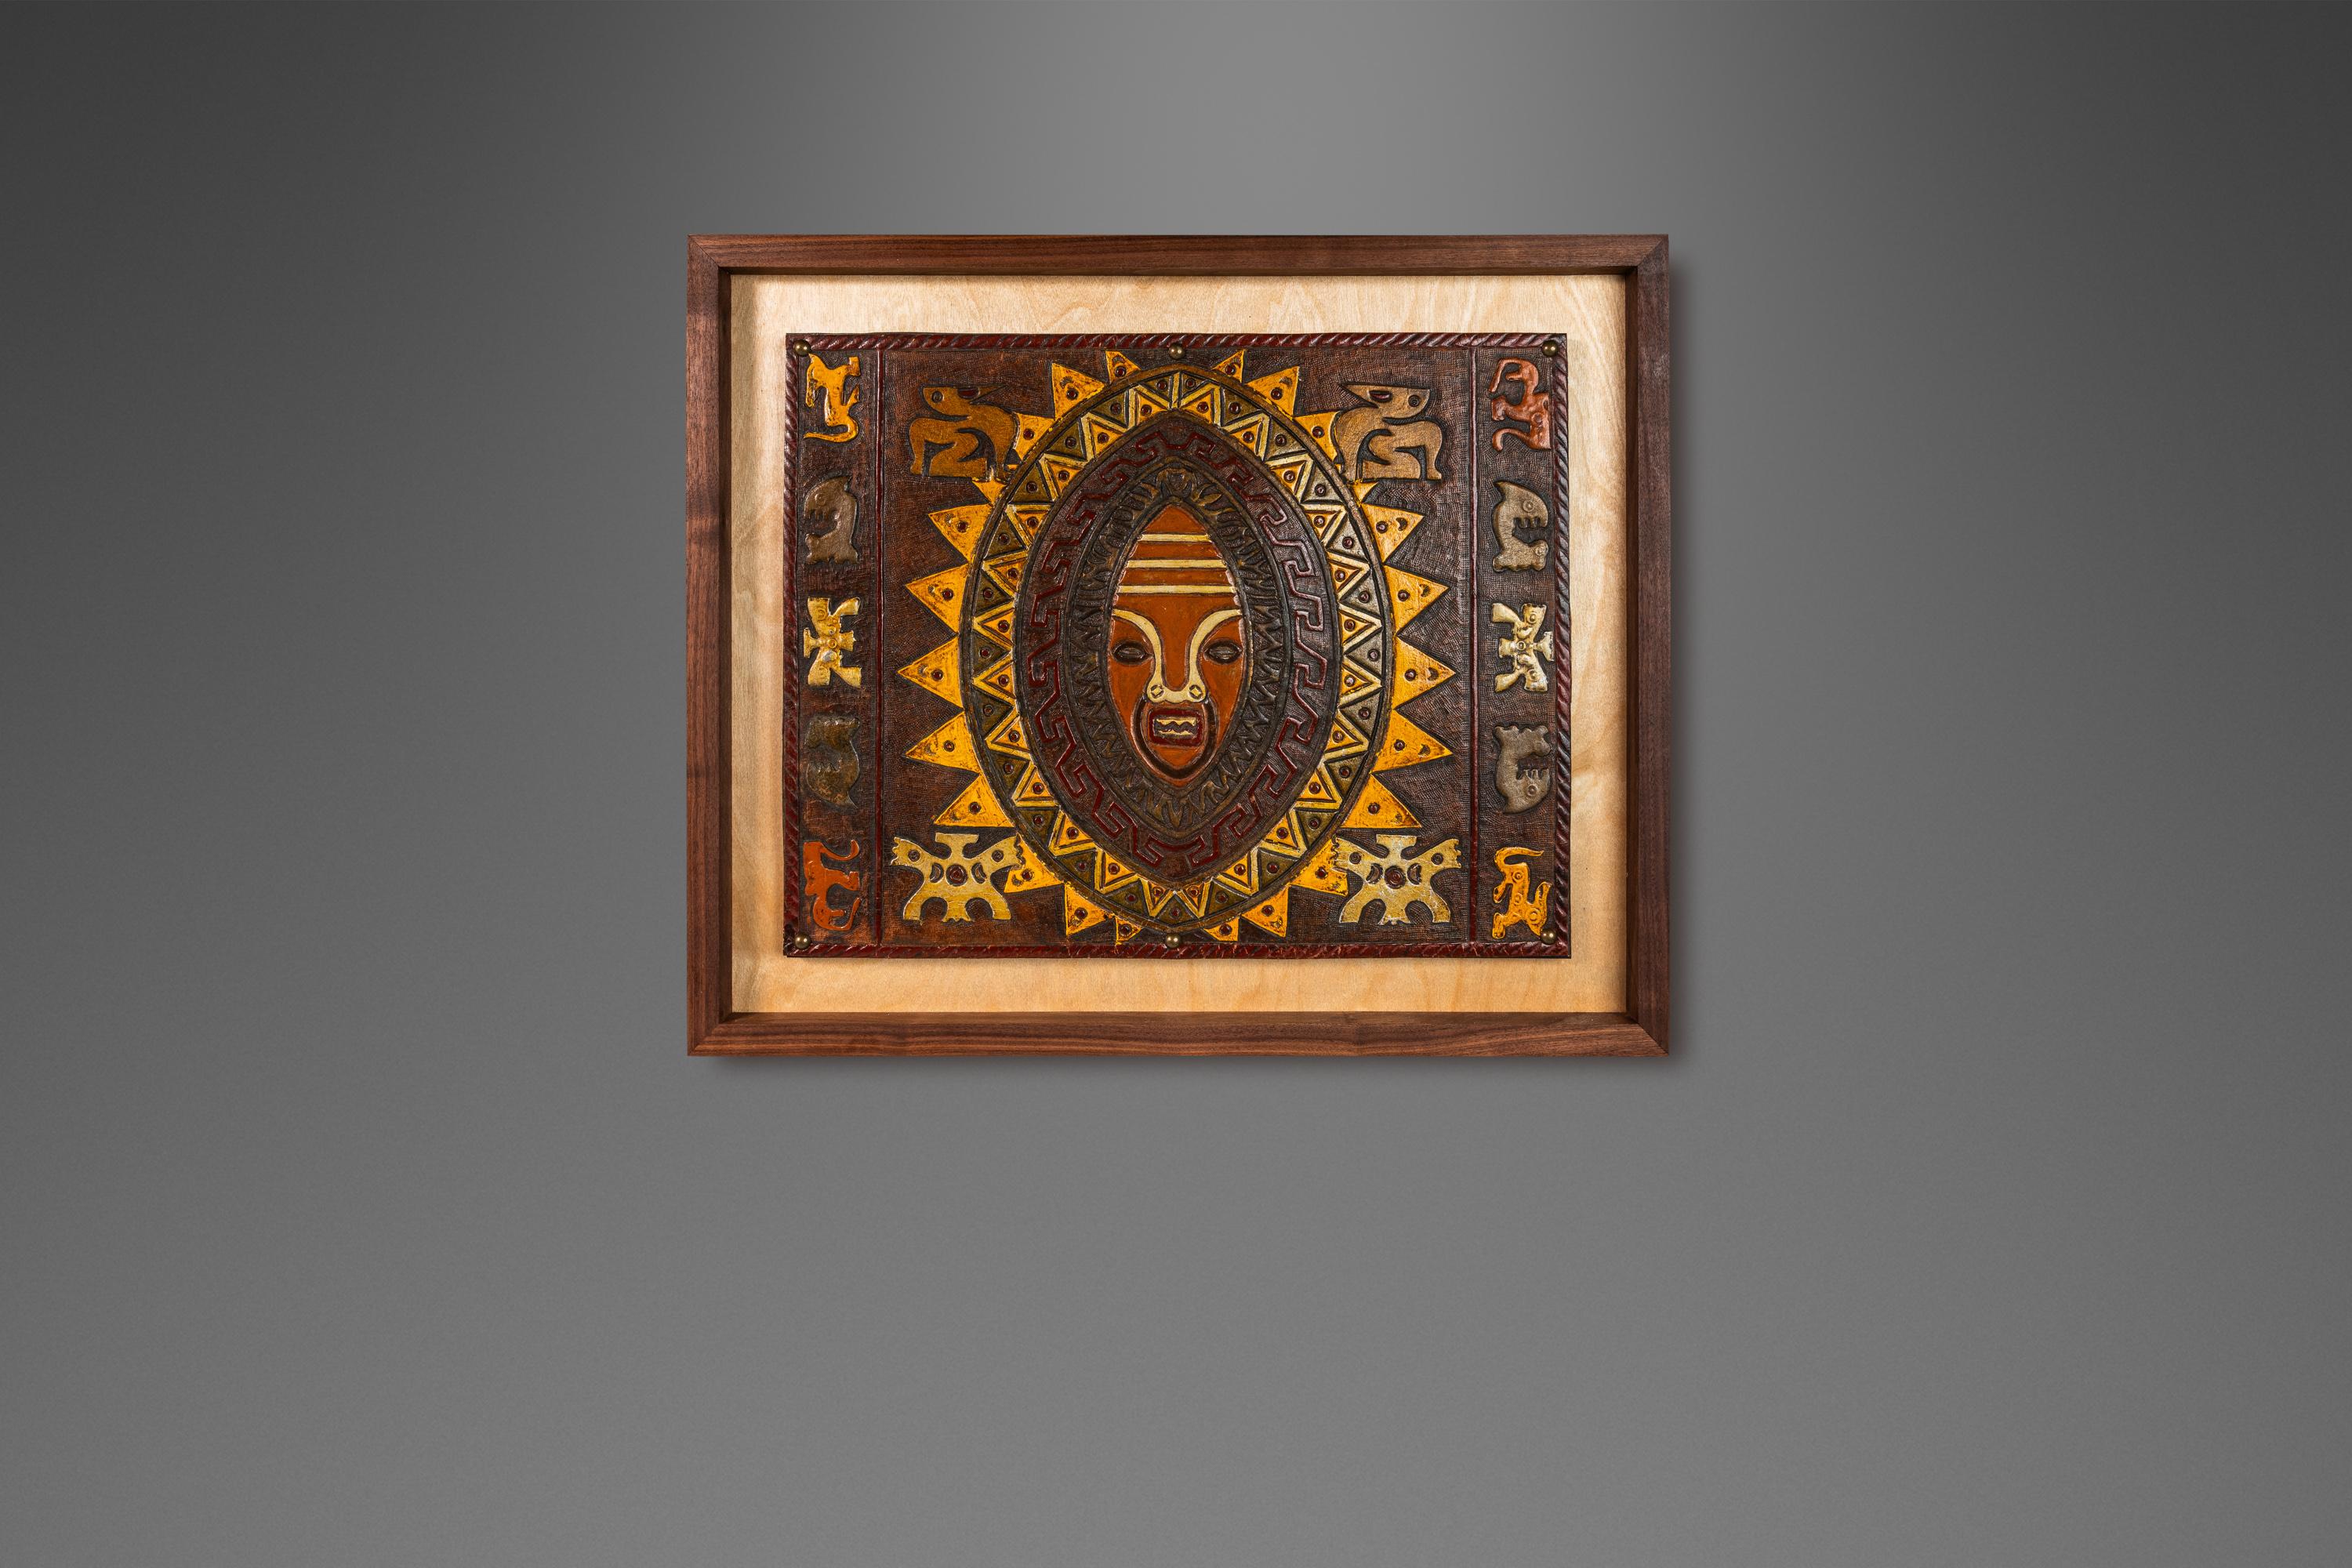 Set of 2 Framed Leather Pre-Columbian Art by Angel Pazmino, Ecuador, c. 1960s For Sale 7